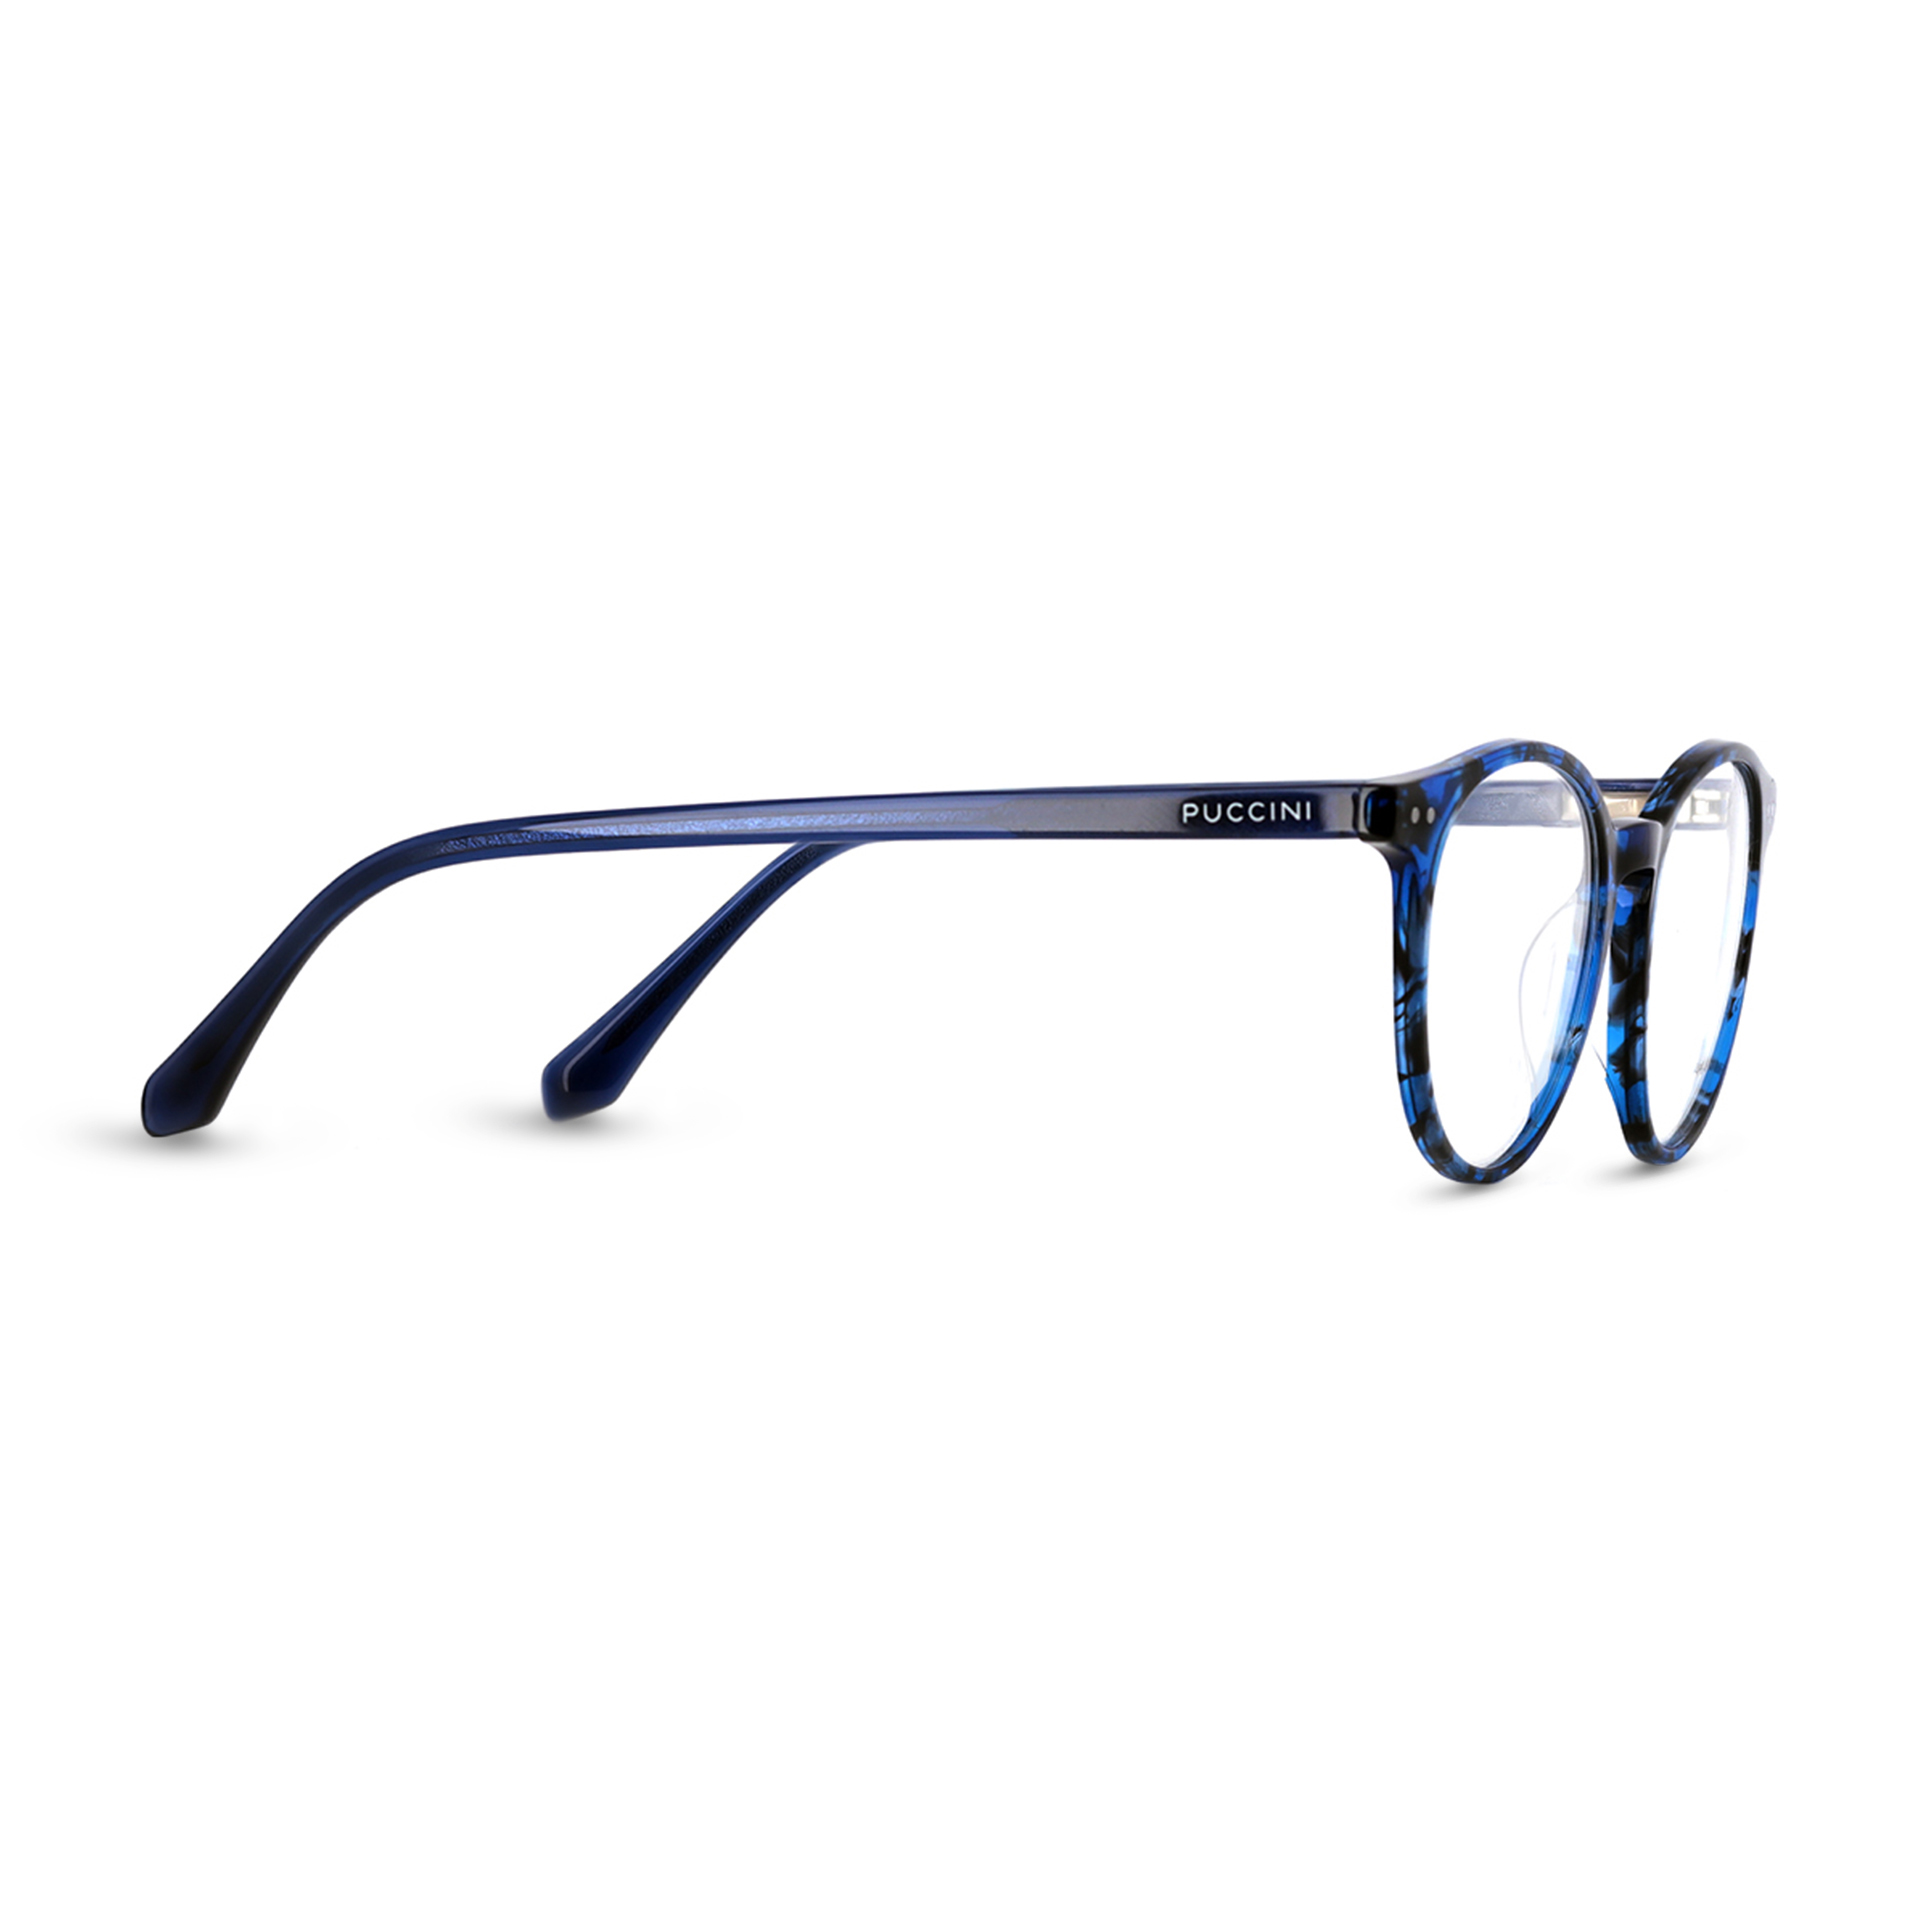 product photography of glasses frames - product photography - Pixterior.com photo studio